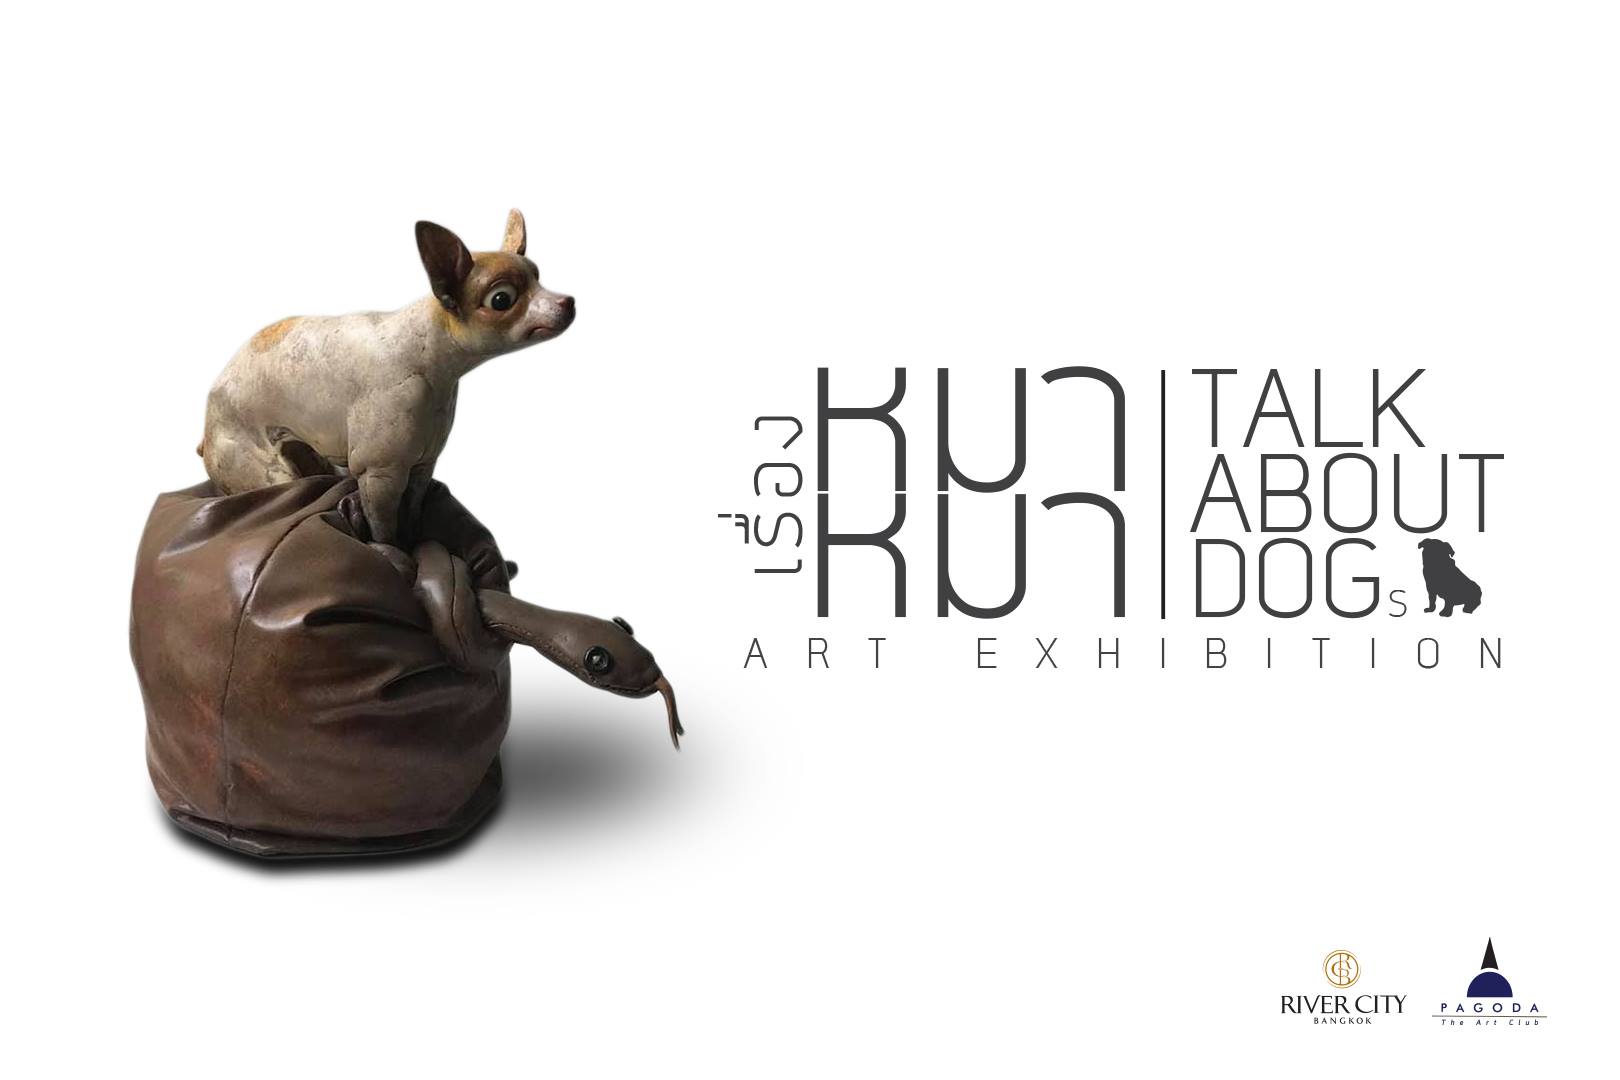 Group Art Exhibition 2019, “Talk about dog” in Bangkok, Thailand